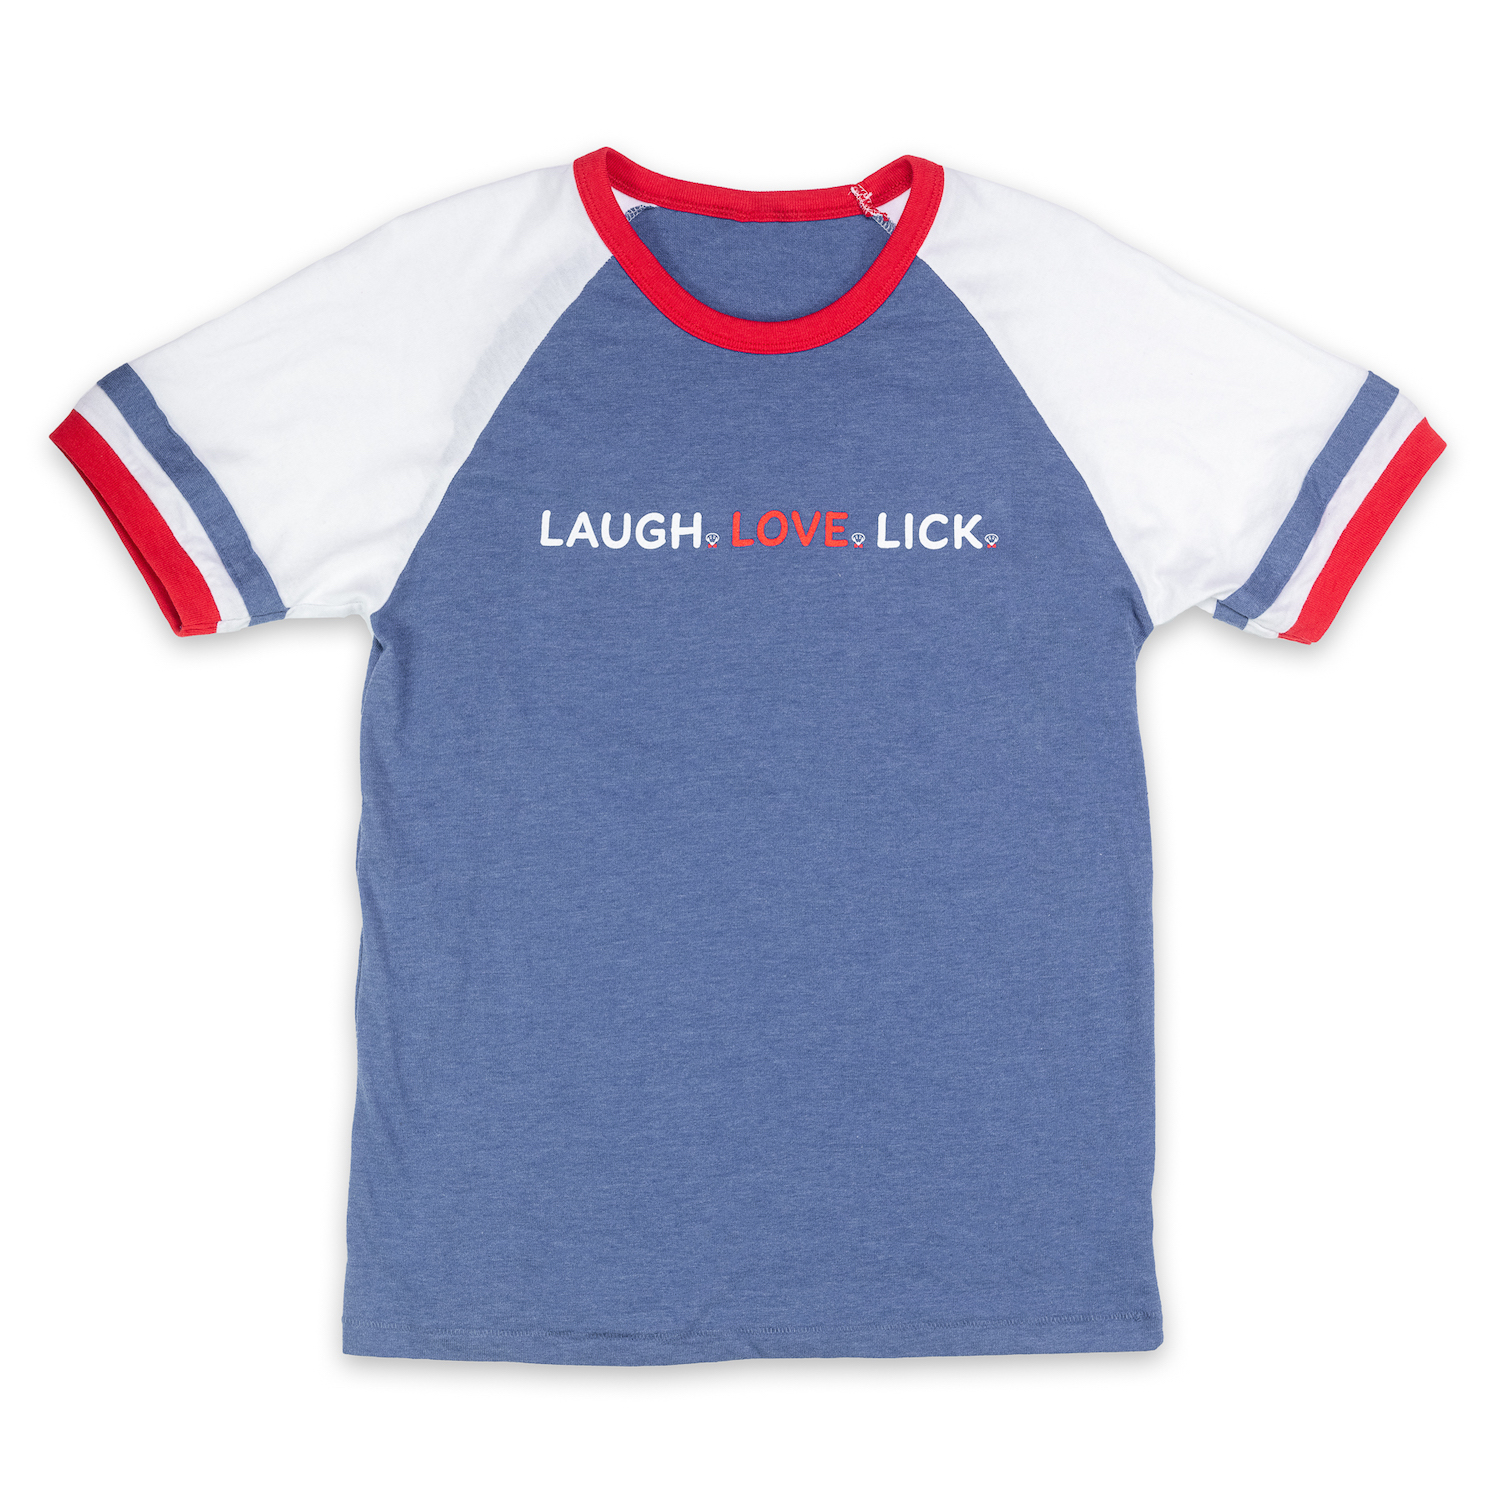 Beau Tyler - Laugh.Love.Lick. T2 blue white red front